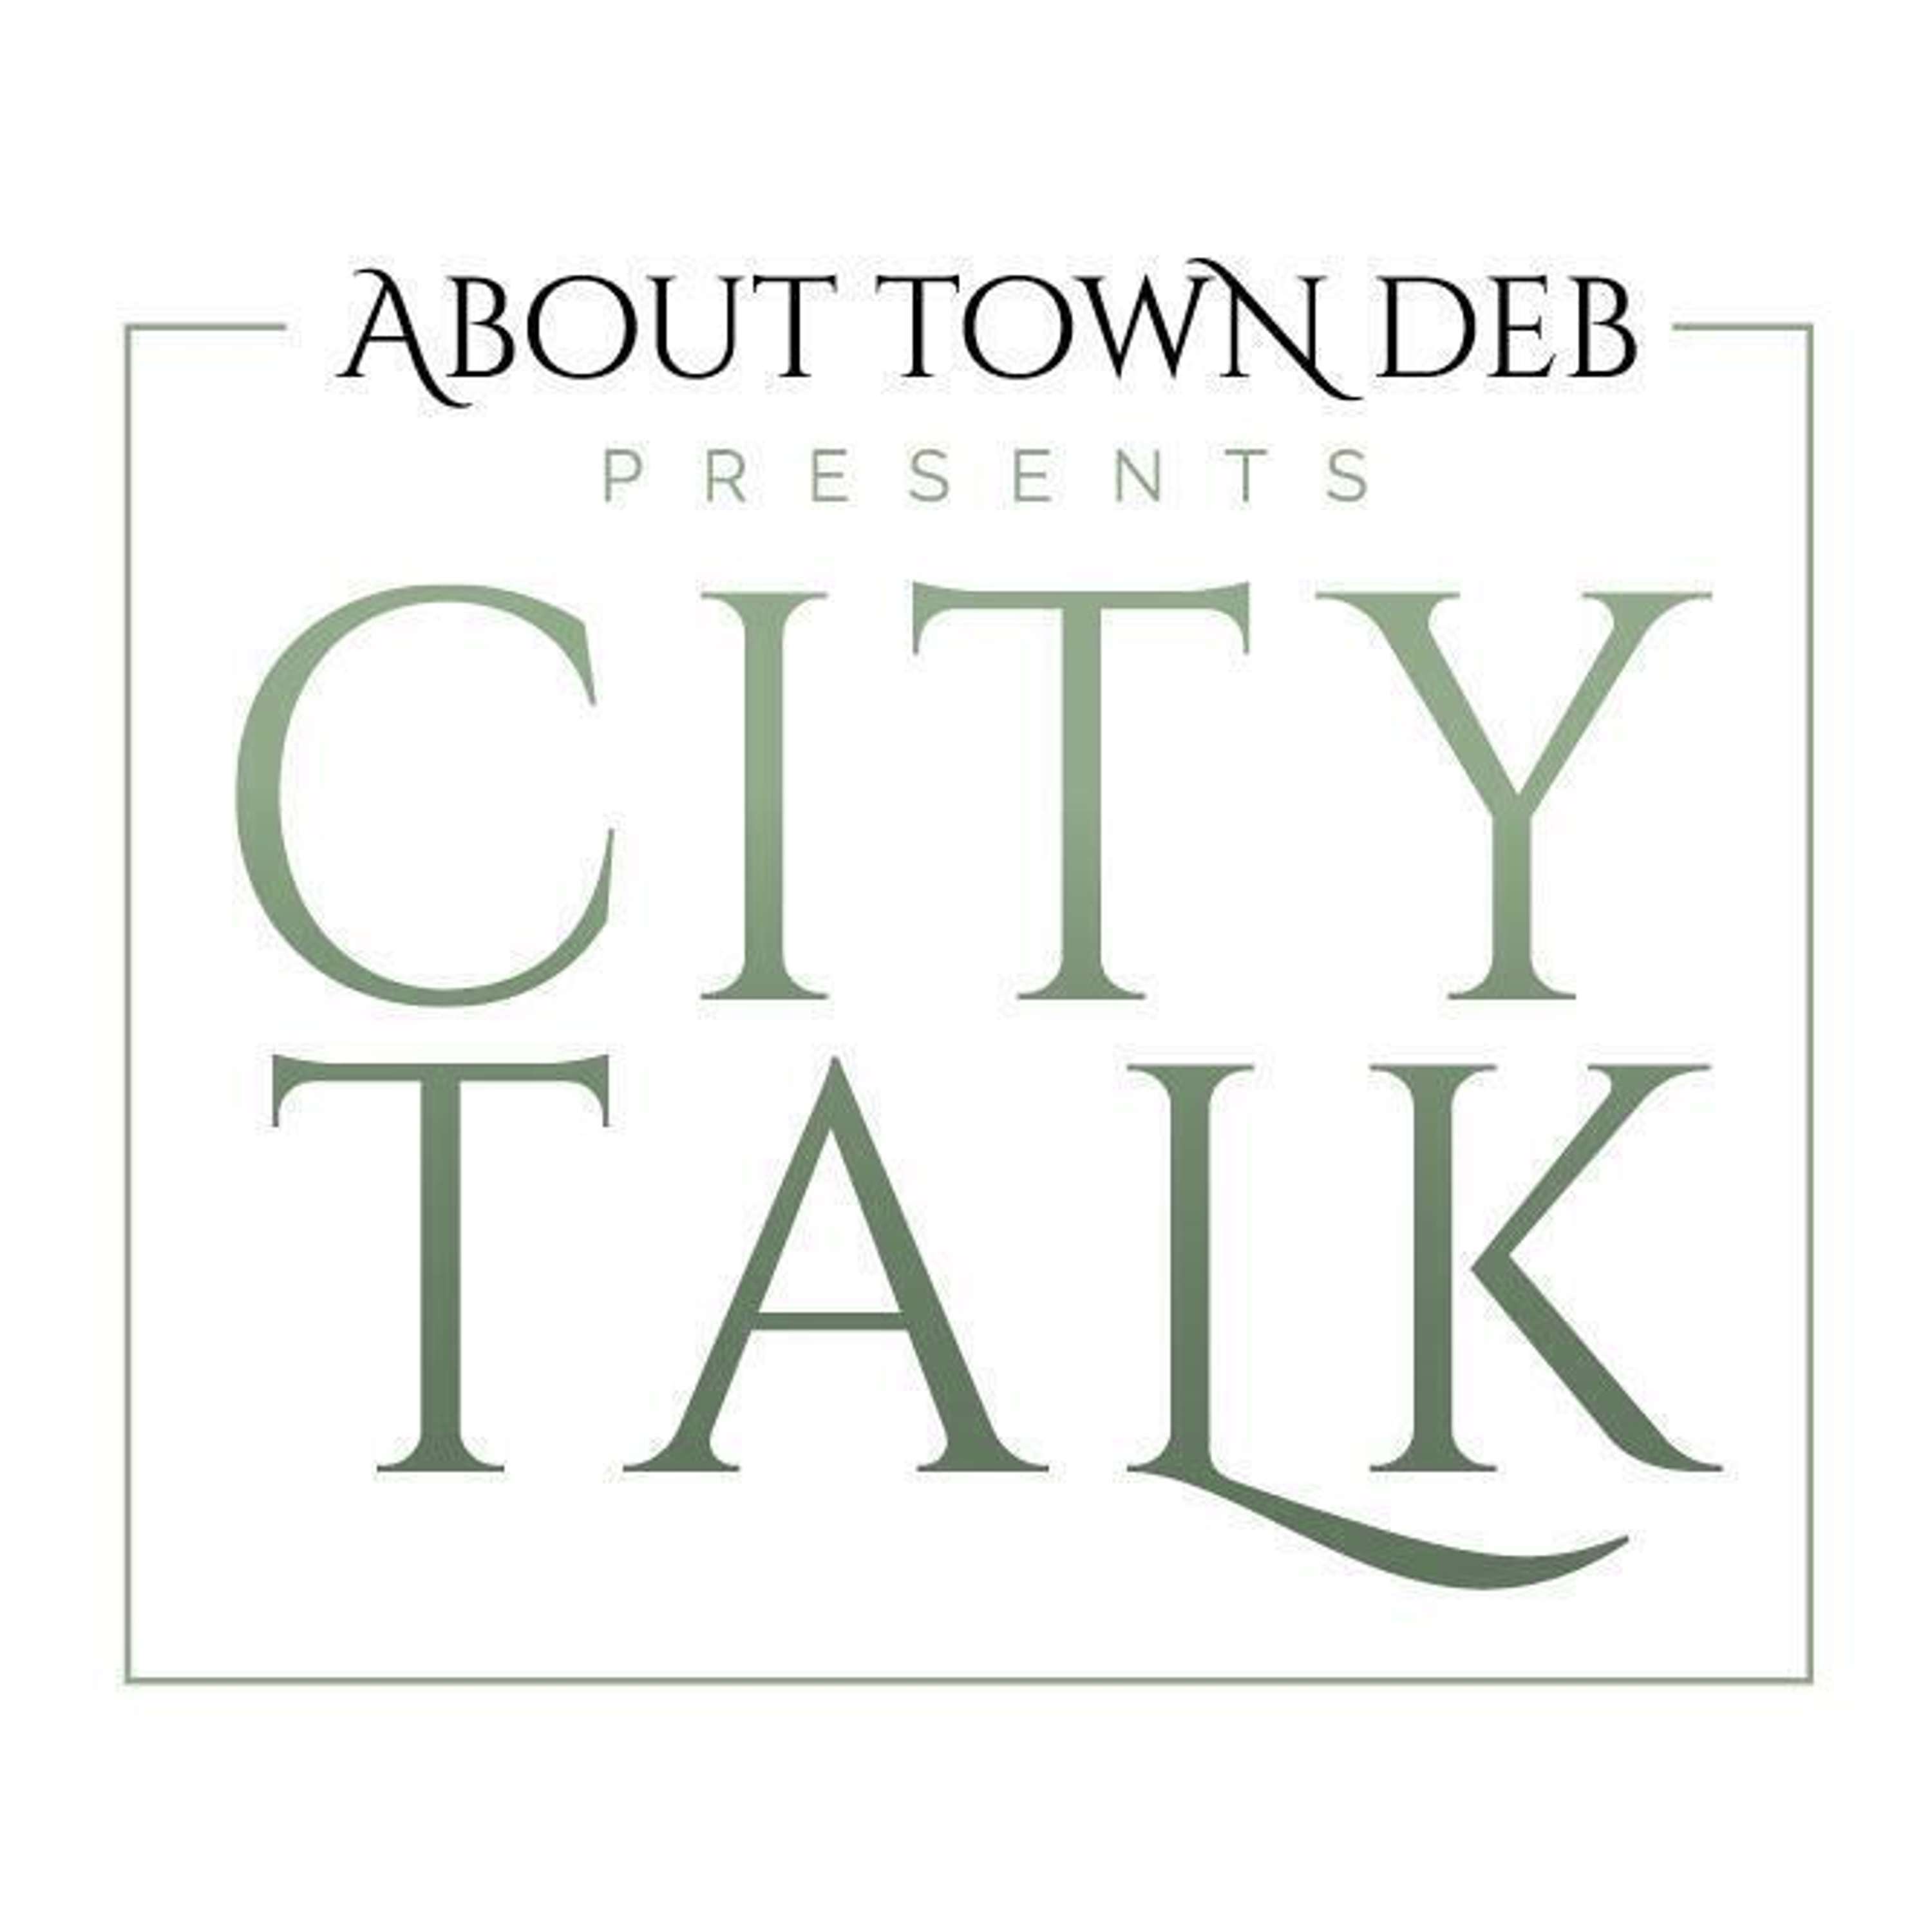 About Town Deb Presents City Talk: Keeping It Real In February with Amber MF Hale (02/15/23)